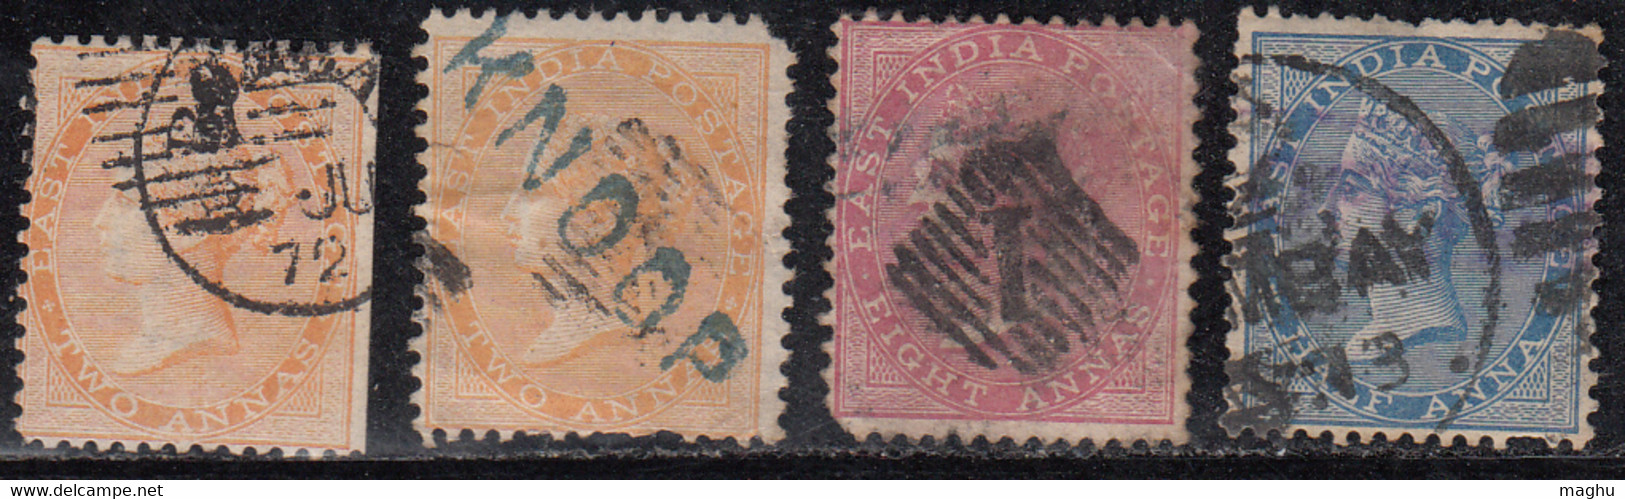 4 Diff., BOMBAY Cancellation, JC Tpye 4 And Local Varities On QV British East India Used, (stamps Damaged) - 1854 Compagnia Inglese Delle Indie